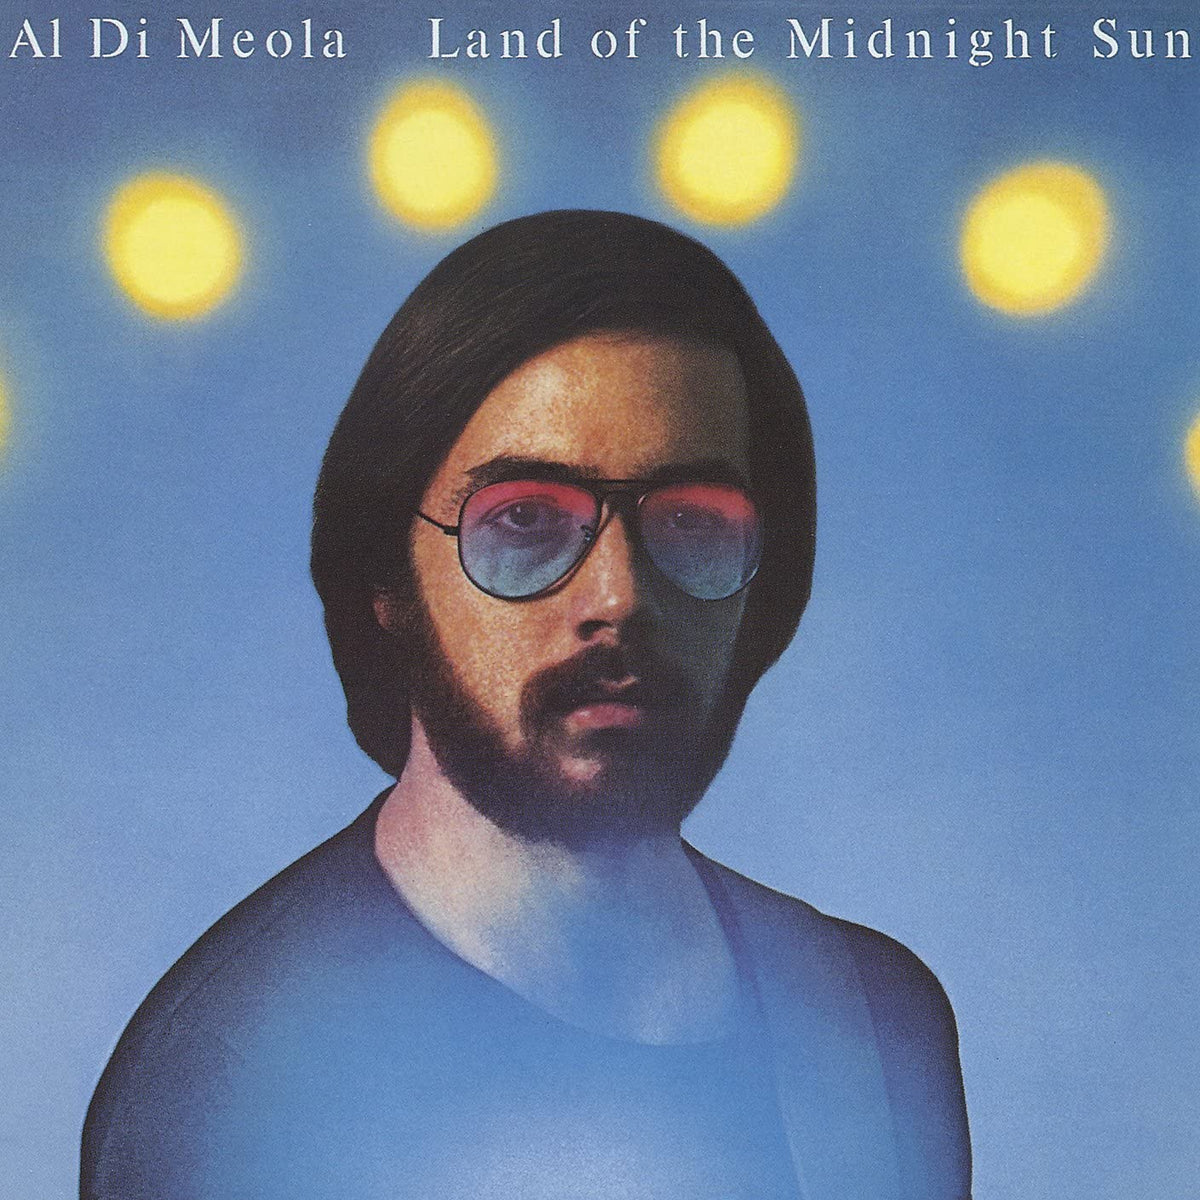 Al Di Meola- Land of the Midnight Sun (Used) (Mint Condition)